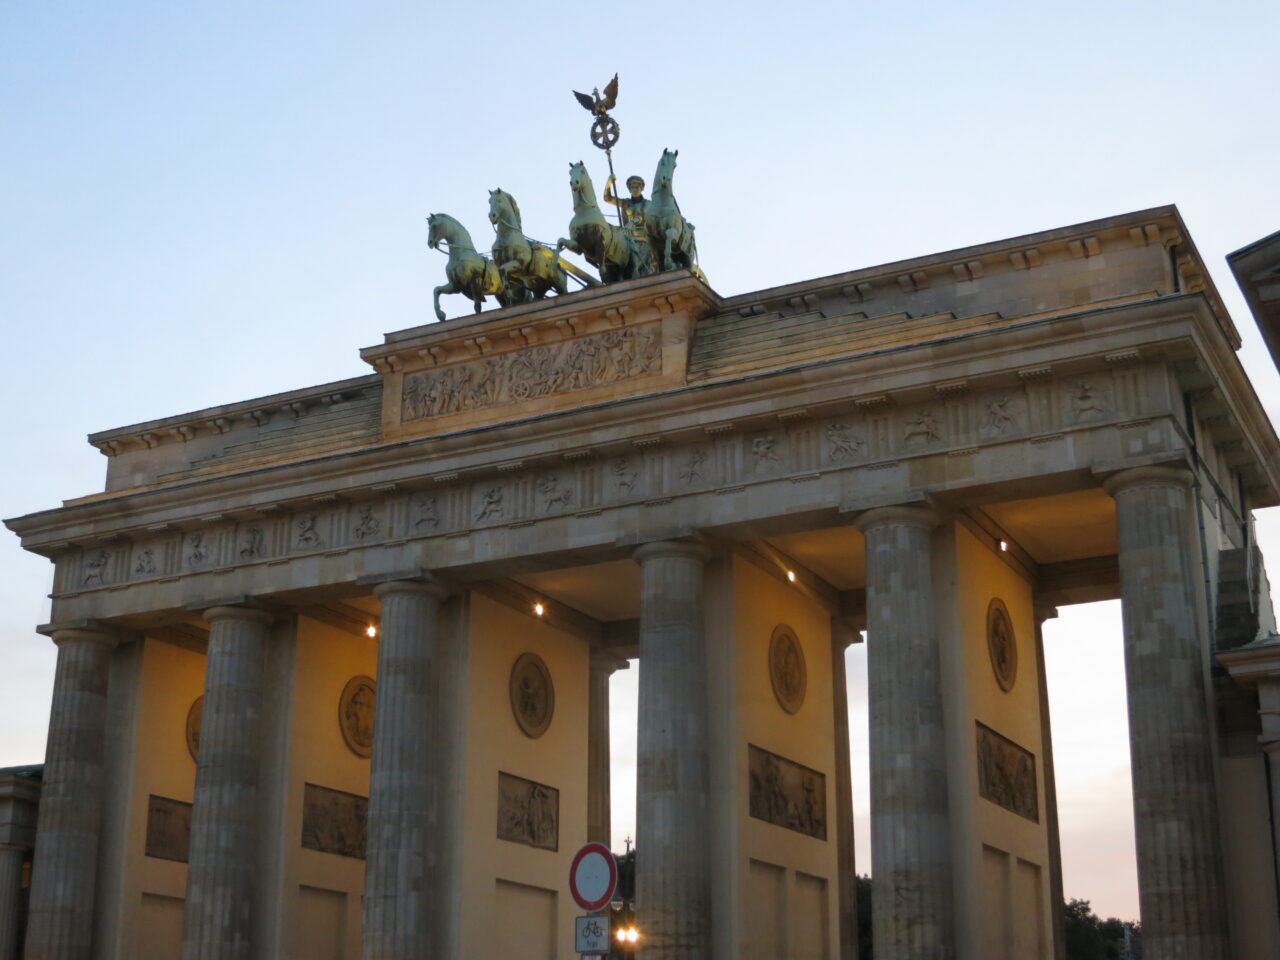 Picture of the Brandenburg Gate is an 18th-century neoclassical monument in Berlin, Germany